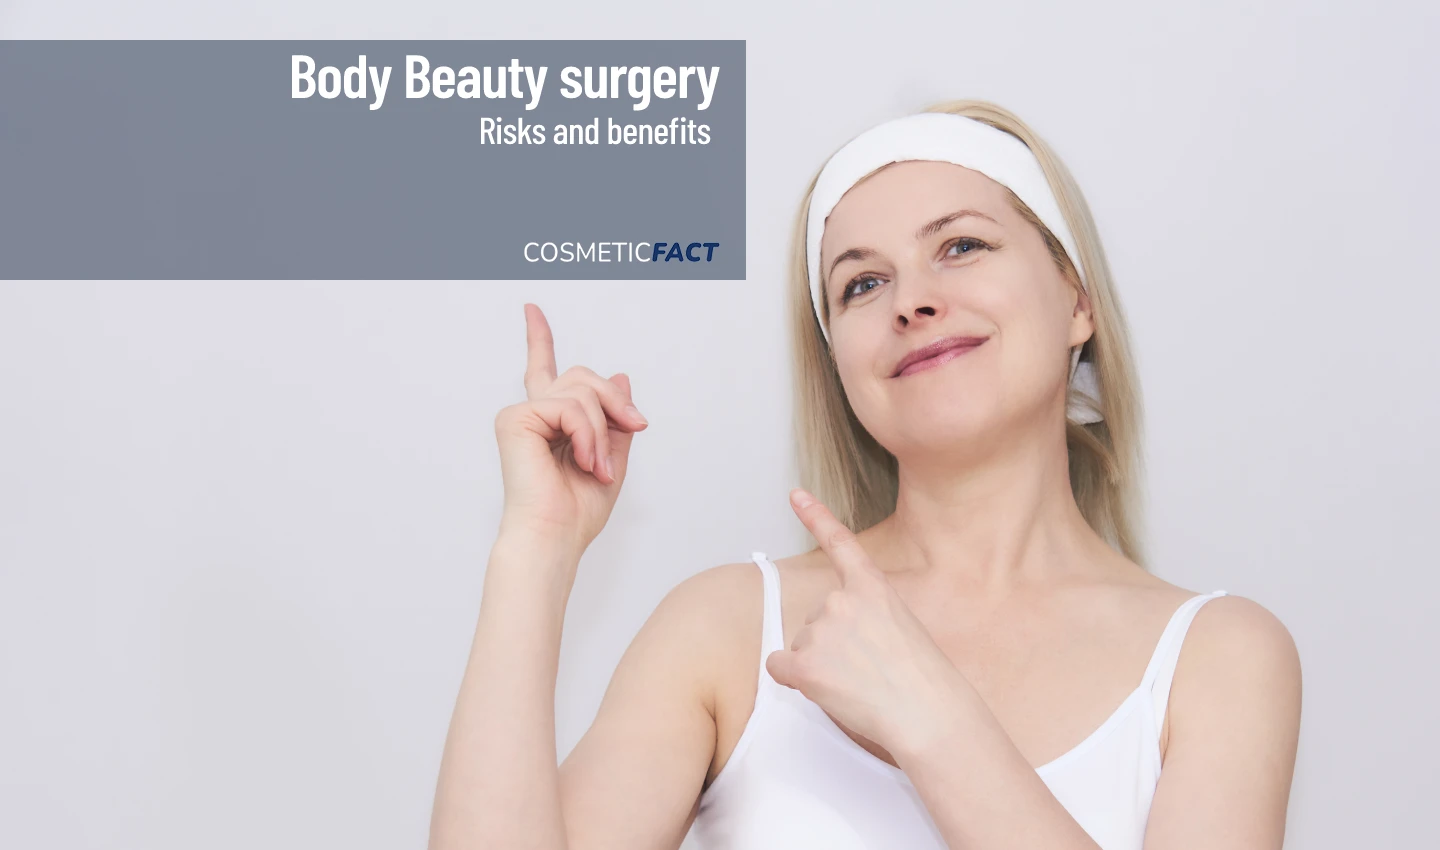 Woman showing health benefits of body cosmetic surgery with her hands.